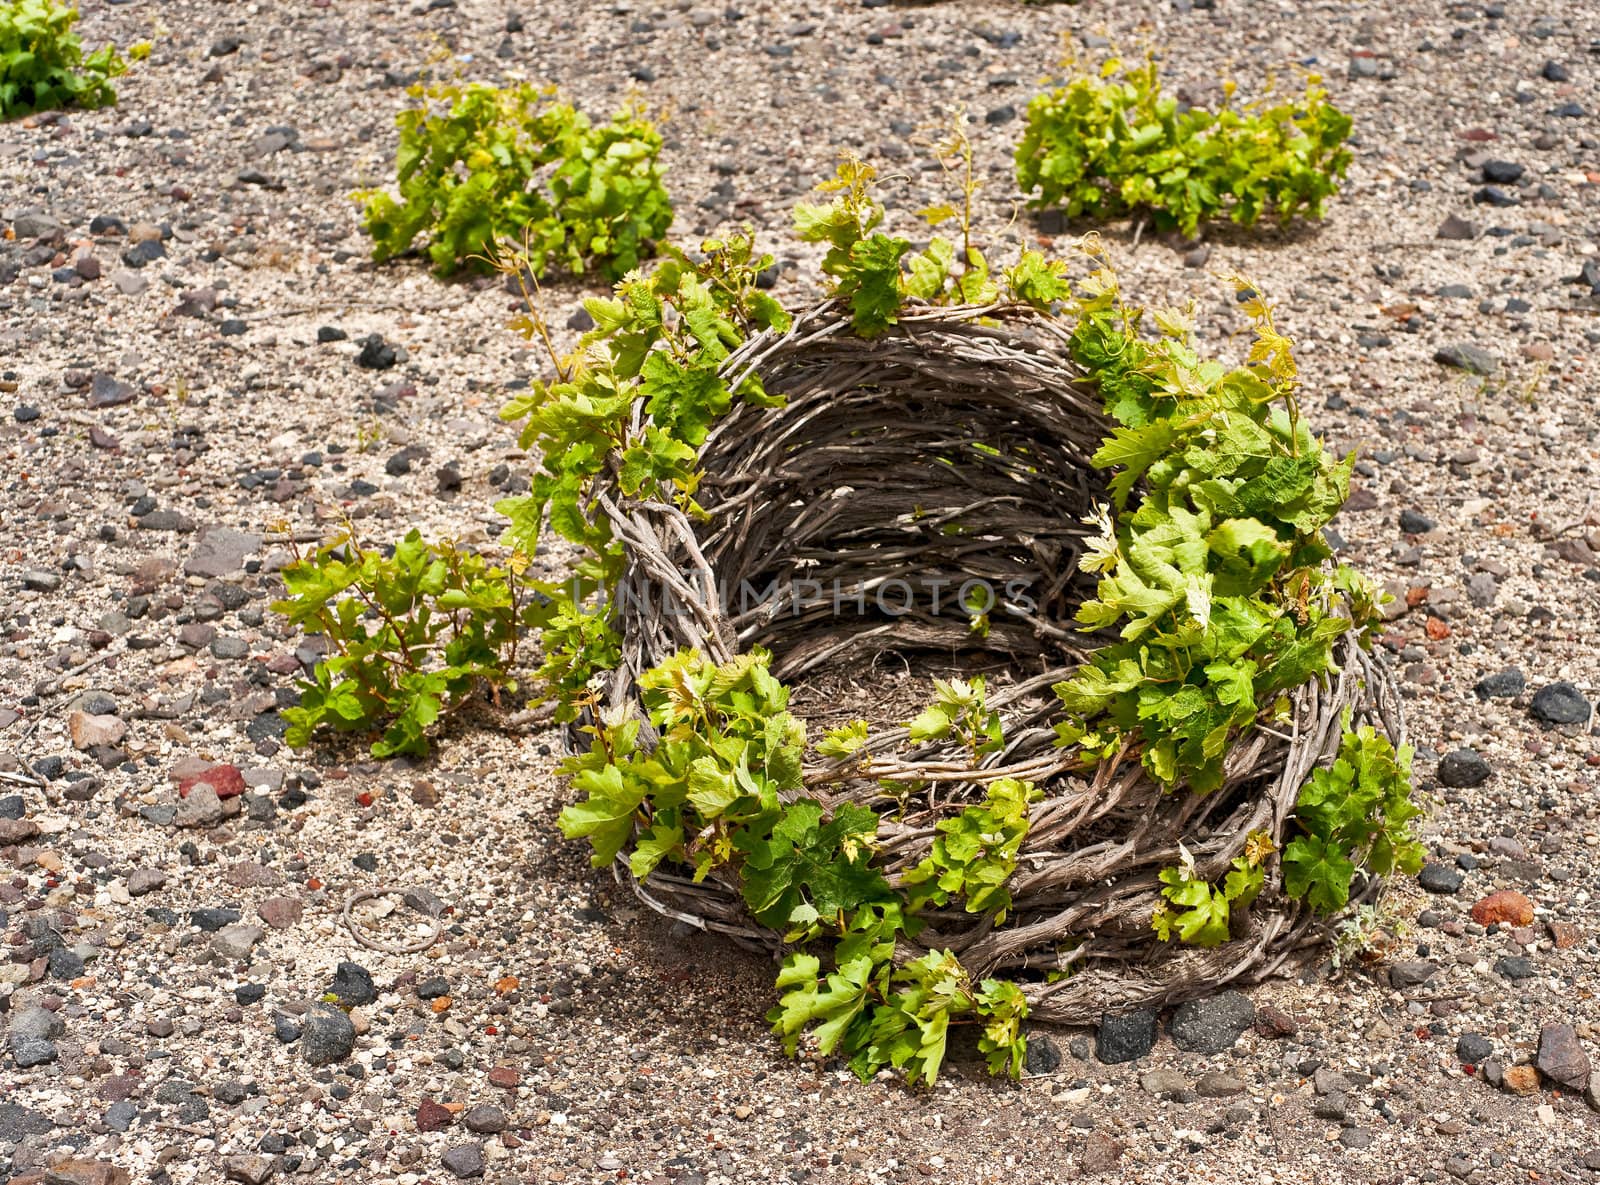 Santorini vine cultivated in low basket shaped crown on lava soil 